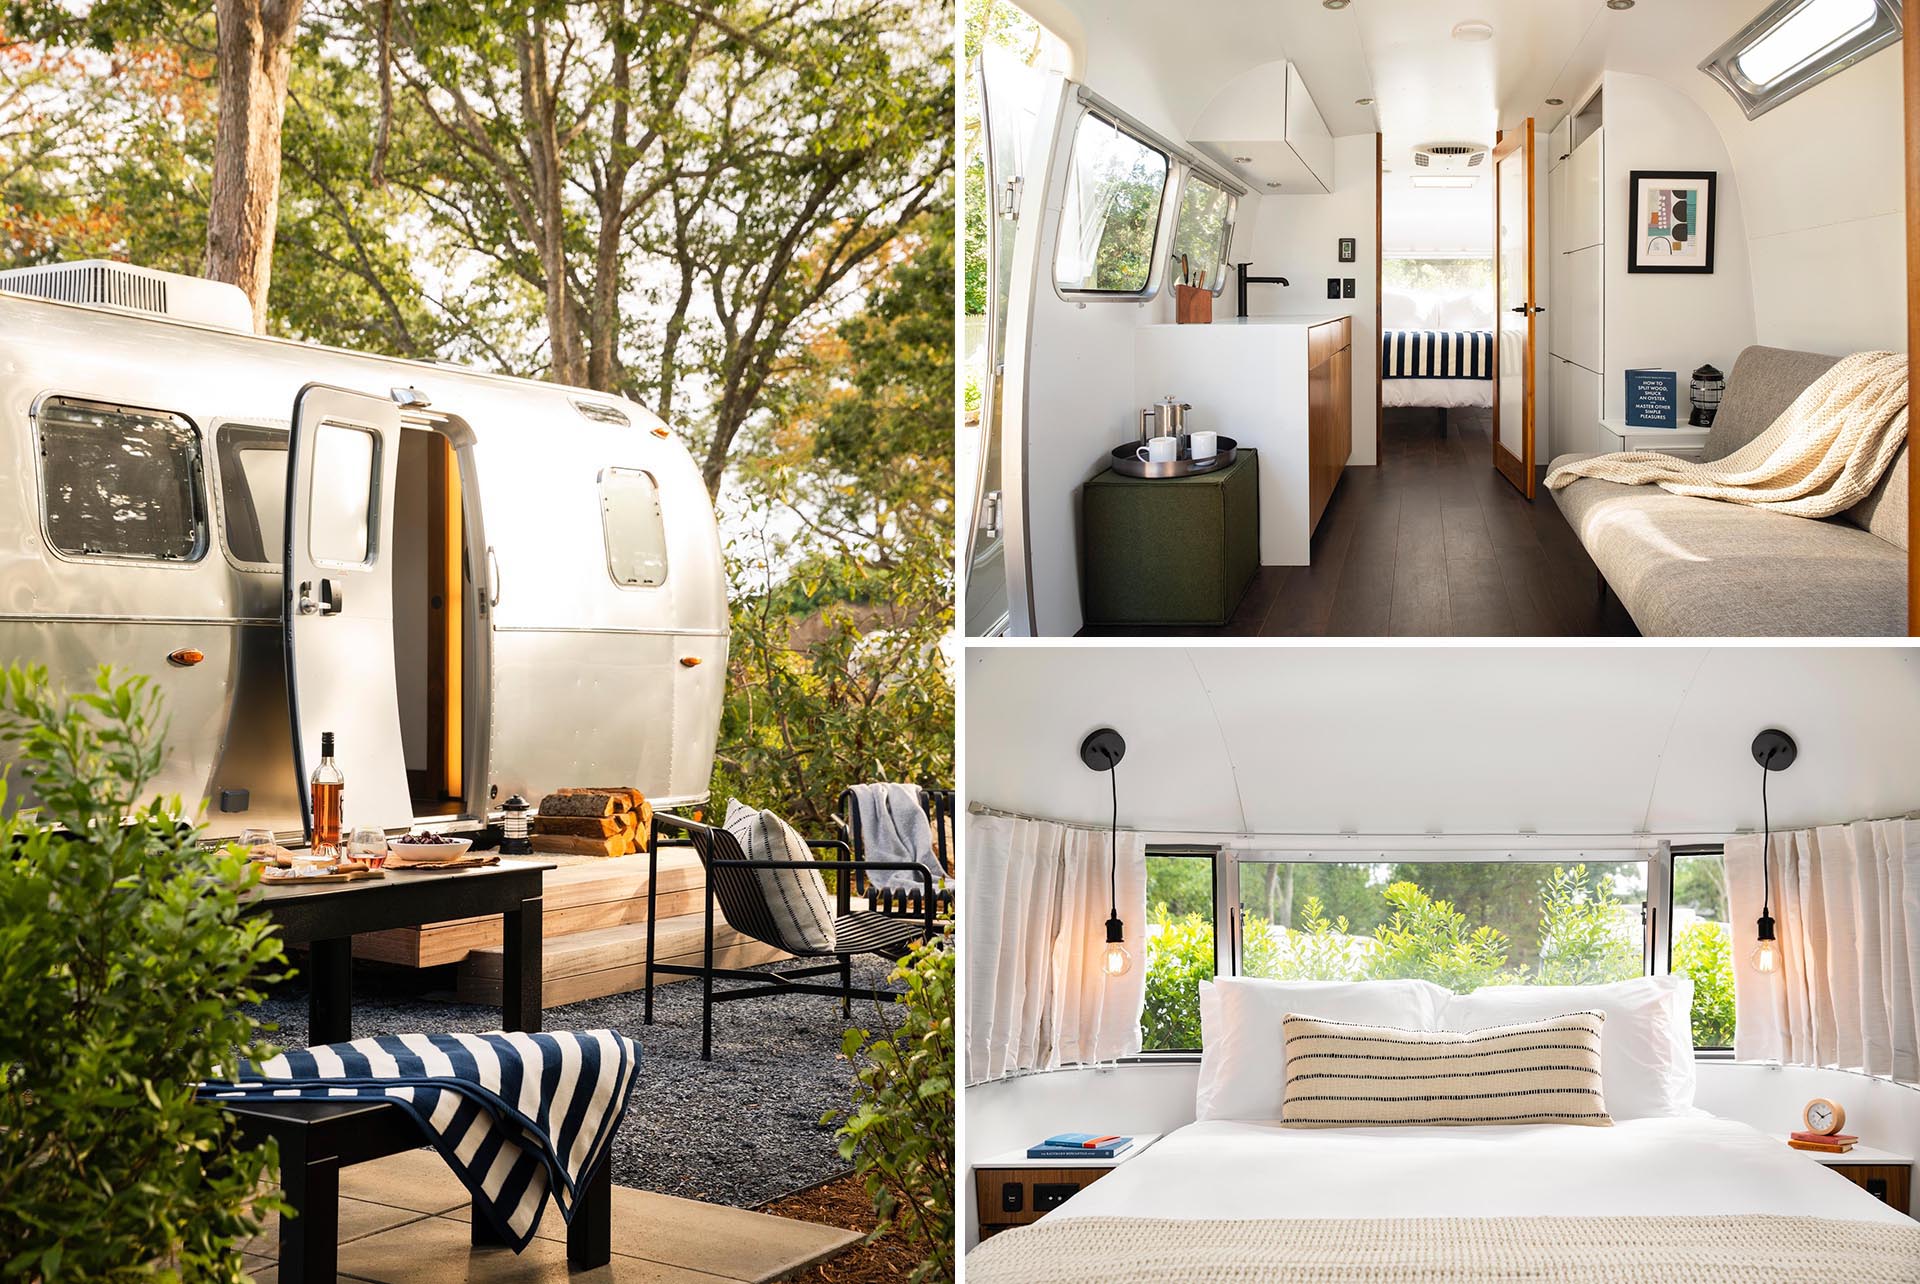 The Orca - Vintage Airstream Remodel from Stagecoach Detail and Design |  Mountain Modern Life